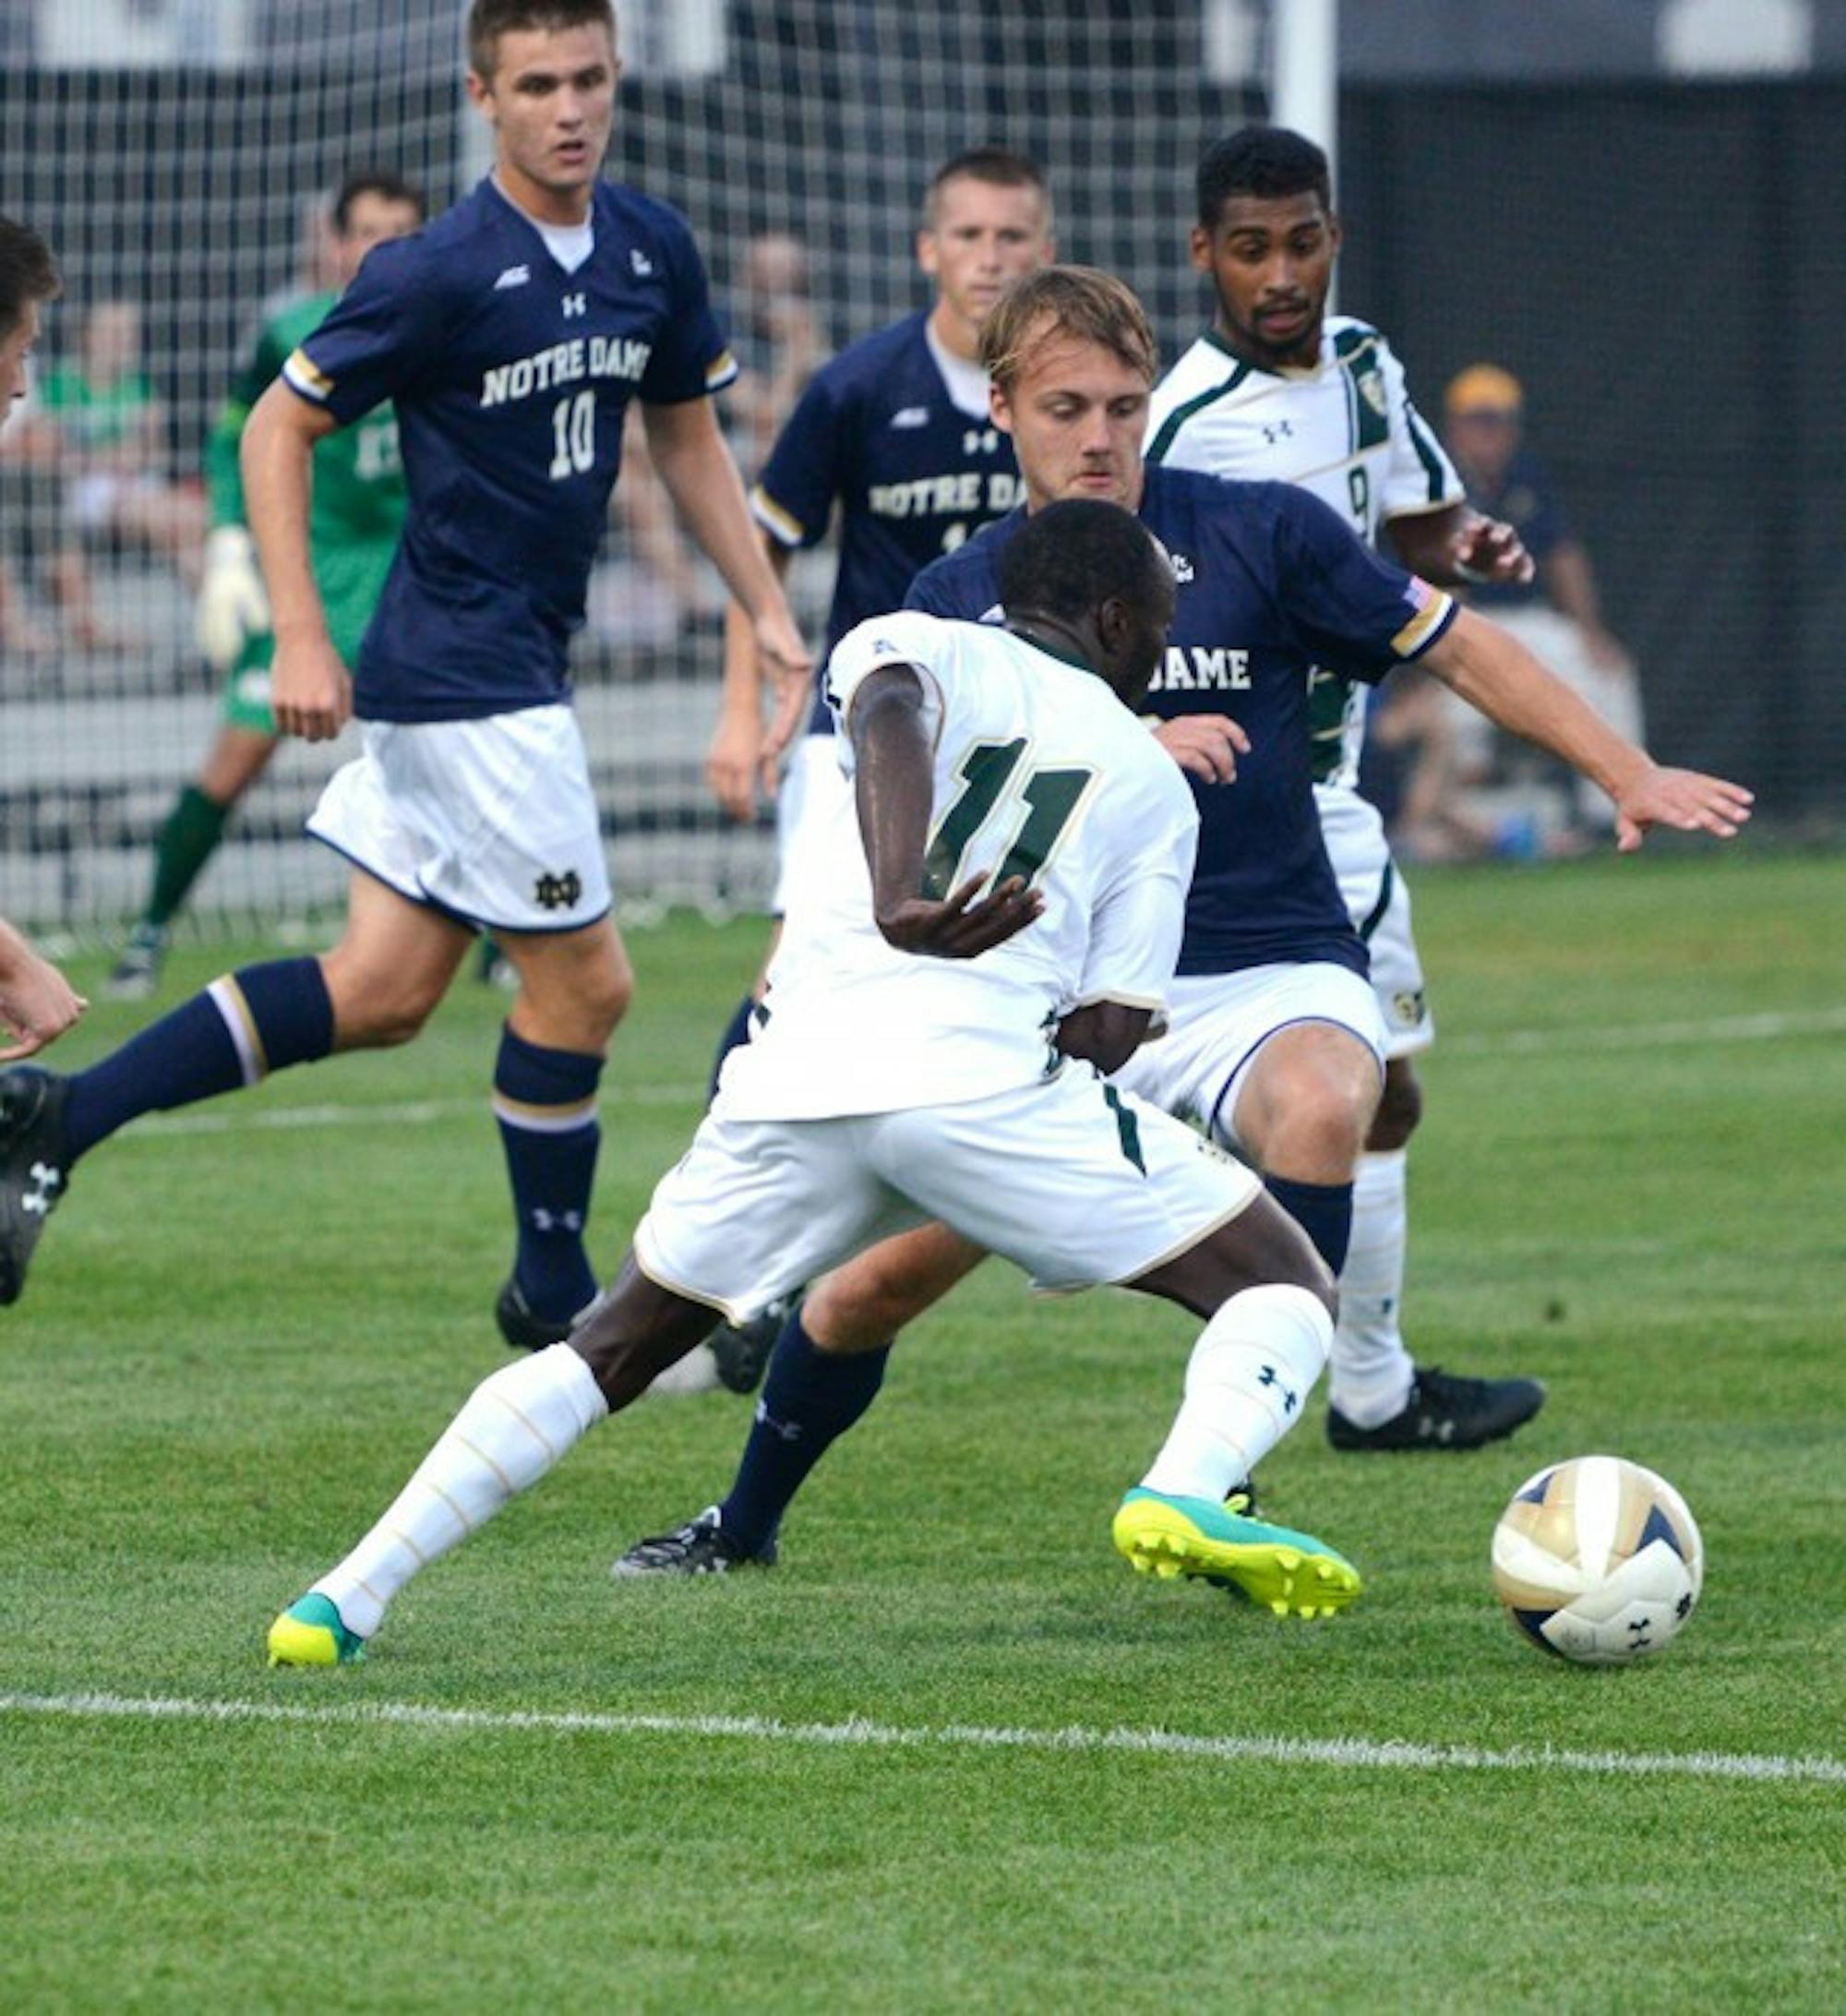 Irish graduate student defender Max Lachowecki, center, challenges for the ball during Notre Dame’s 2-0  victory over South Florida on Sept. 4 at Alumni Stadium. The Irish have not conceded any goals this season.